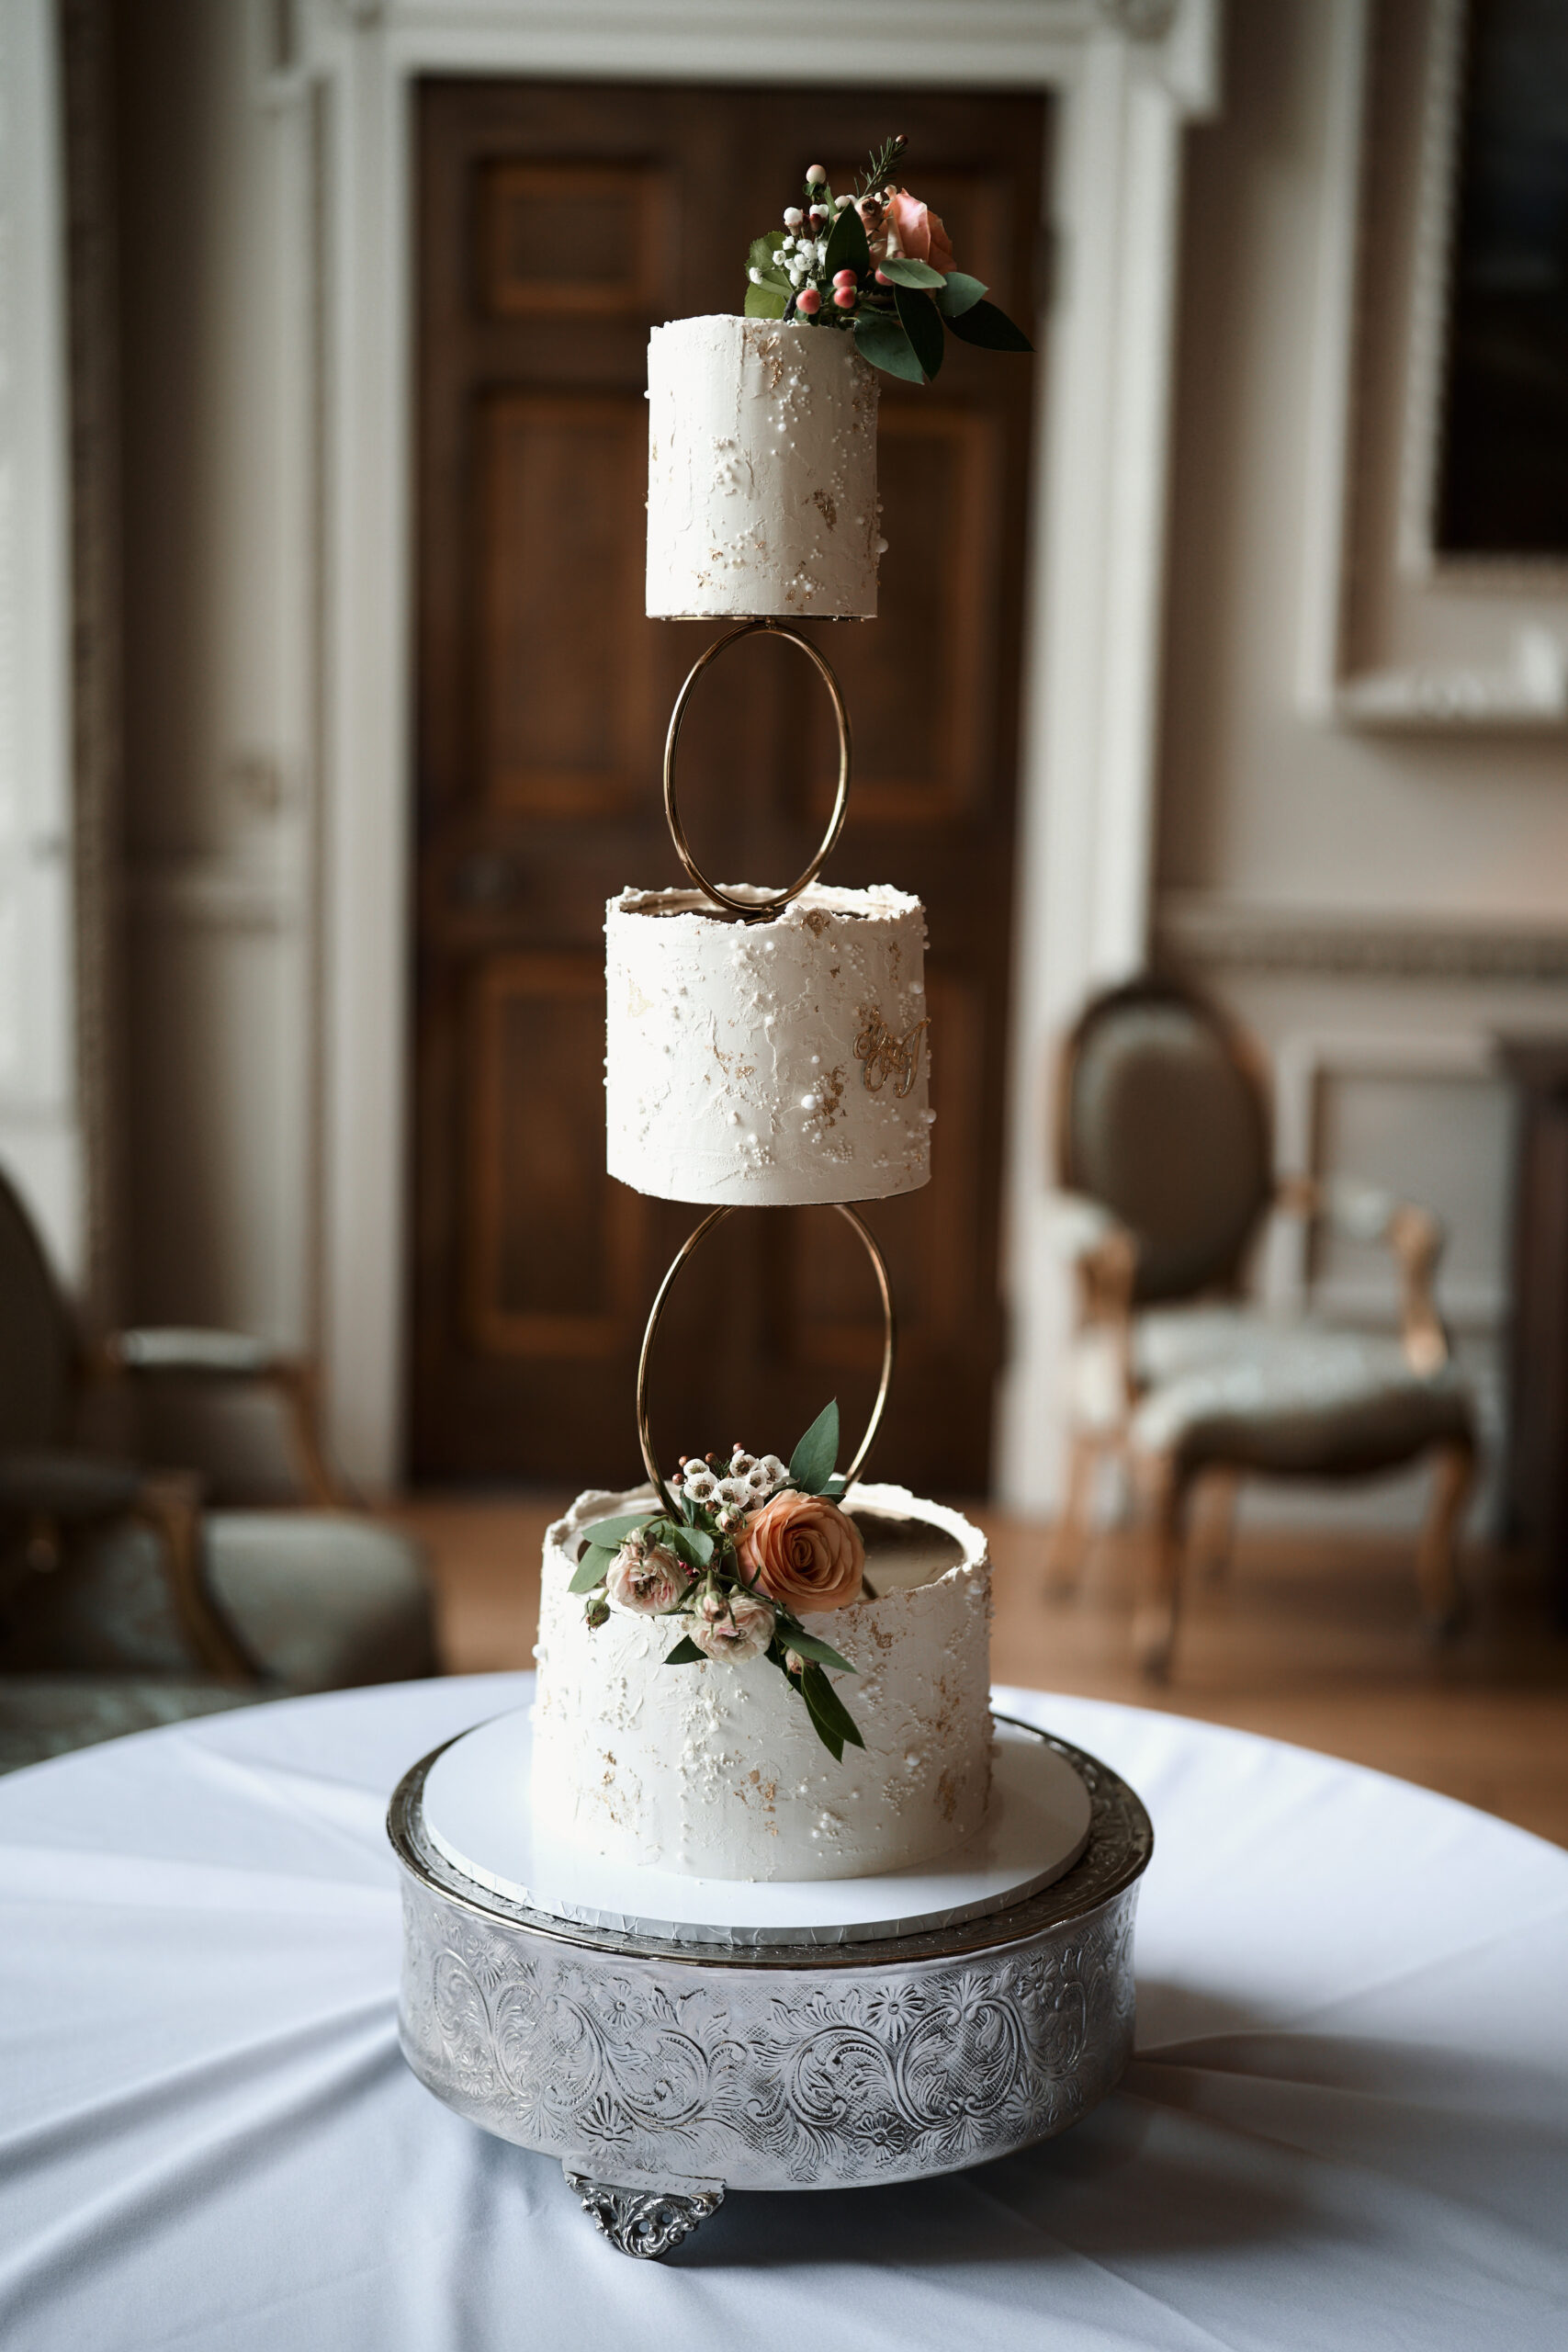 There's a three-layer wedding cake on a table in a room.